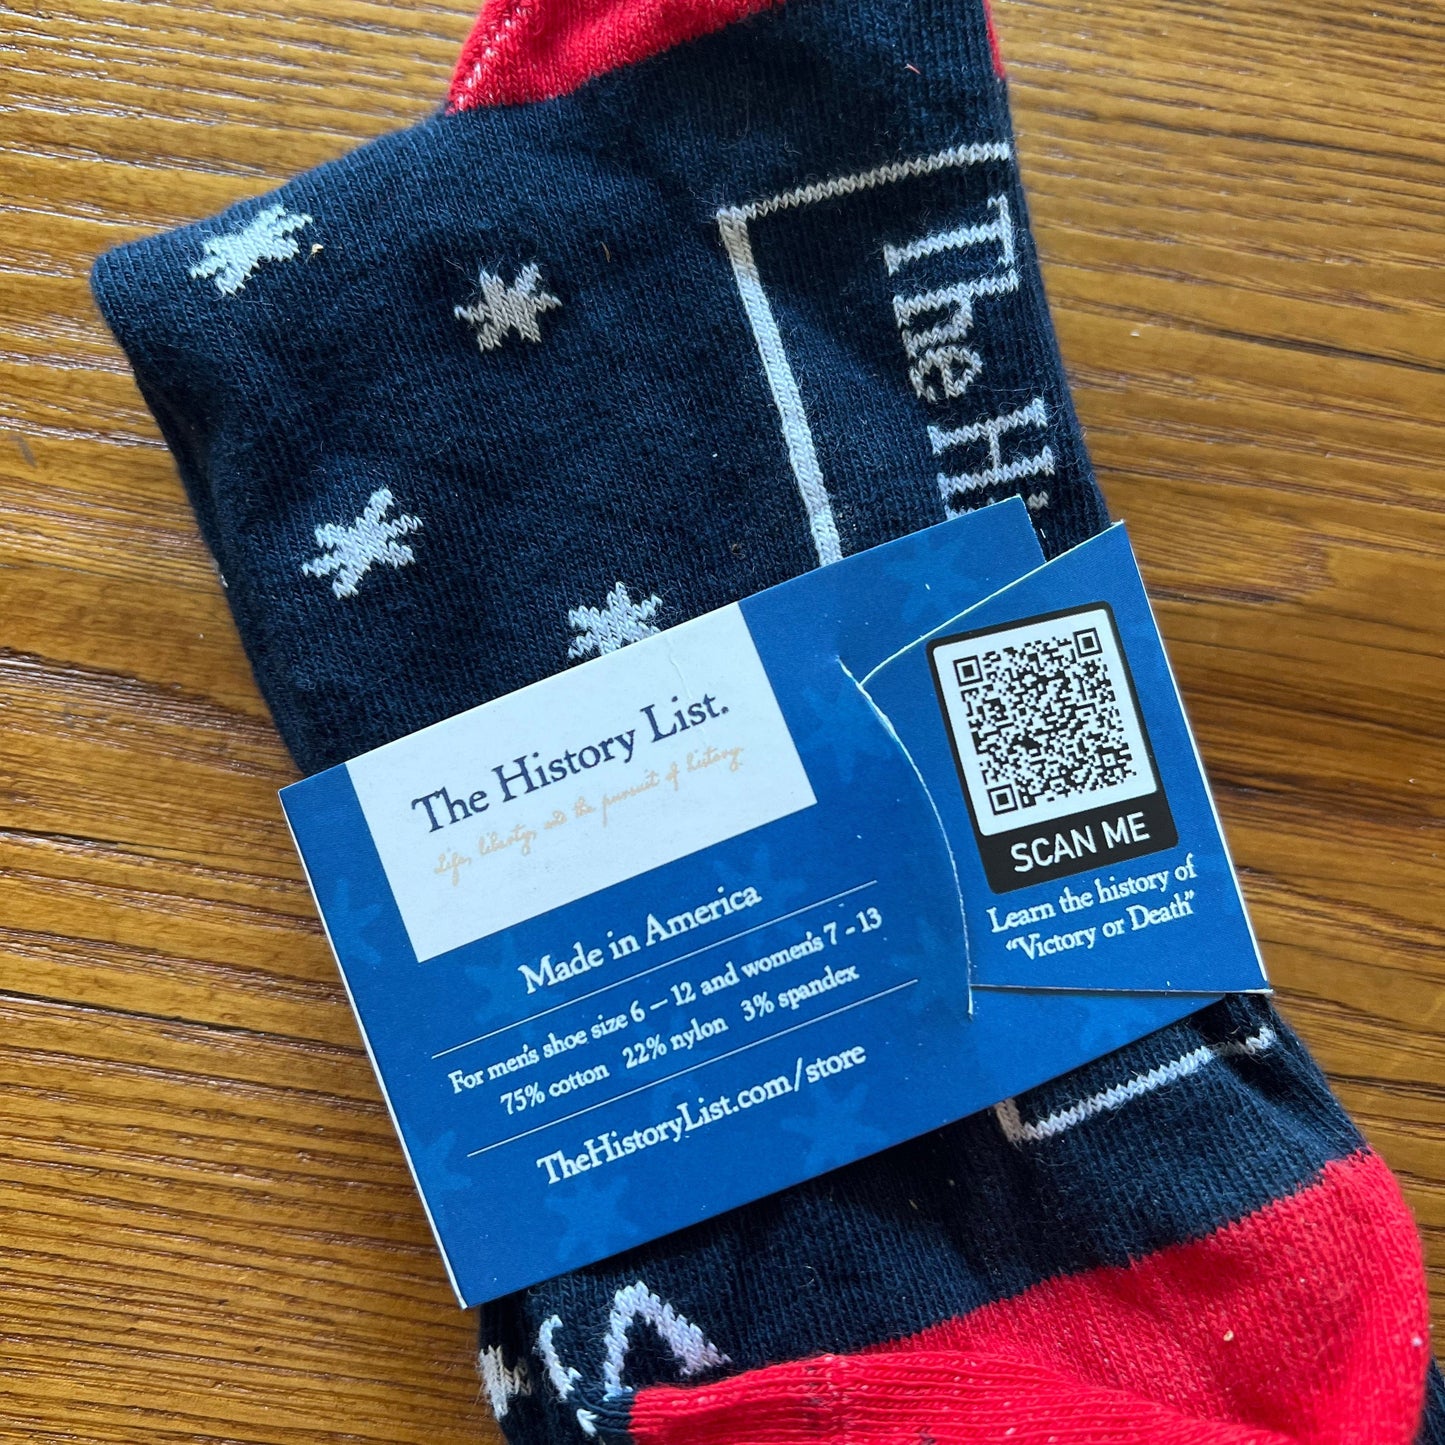 A pair of "Victory or Death" Socks — Made in USA from The History List store sockband